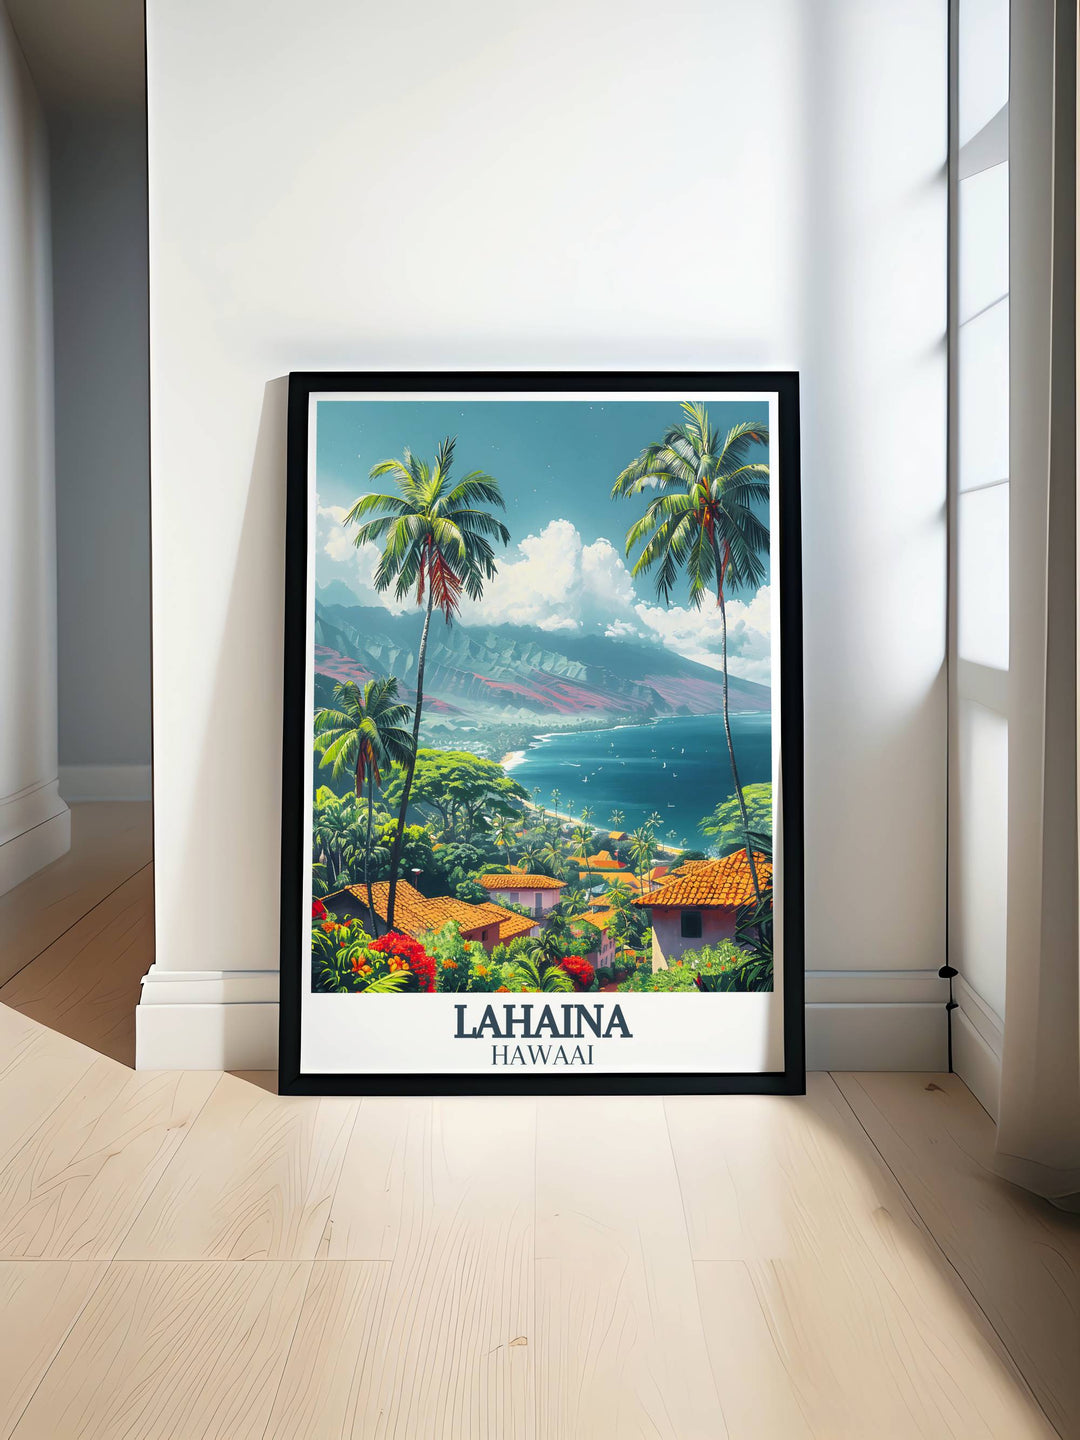 Detailed gallery wall art of Lahaina showing the picturesque Front Street and tropical Hawaiian landscapes, perfect for adding a touch of Hawaii to any room.